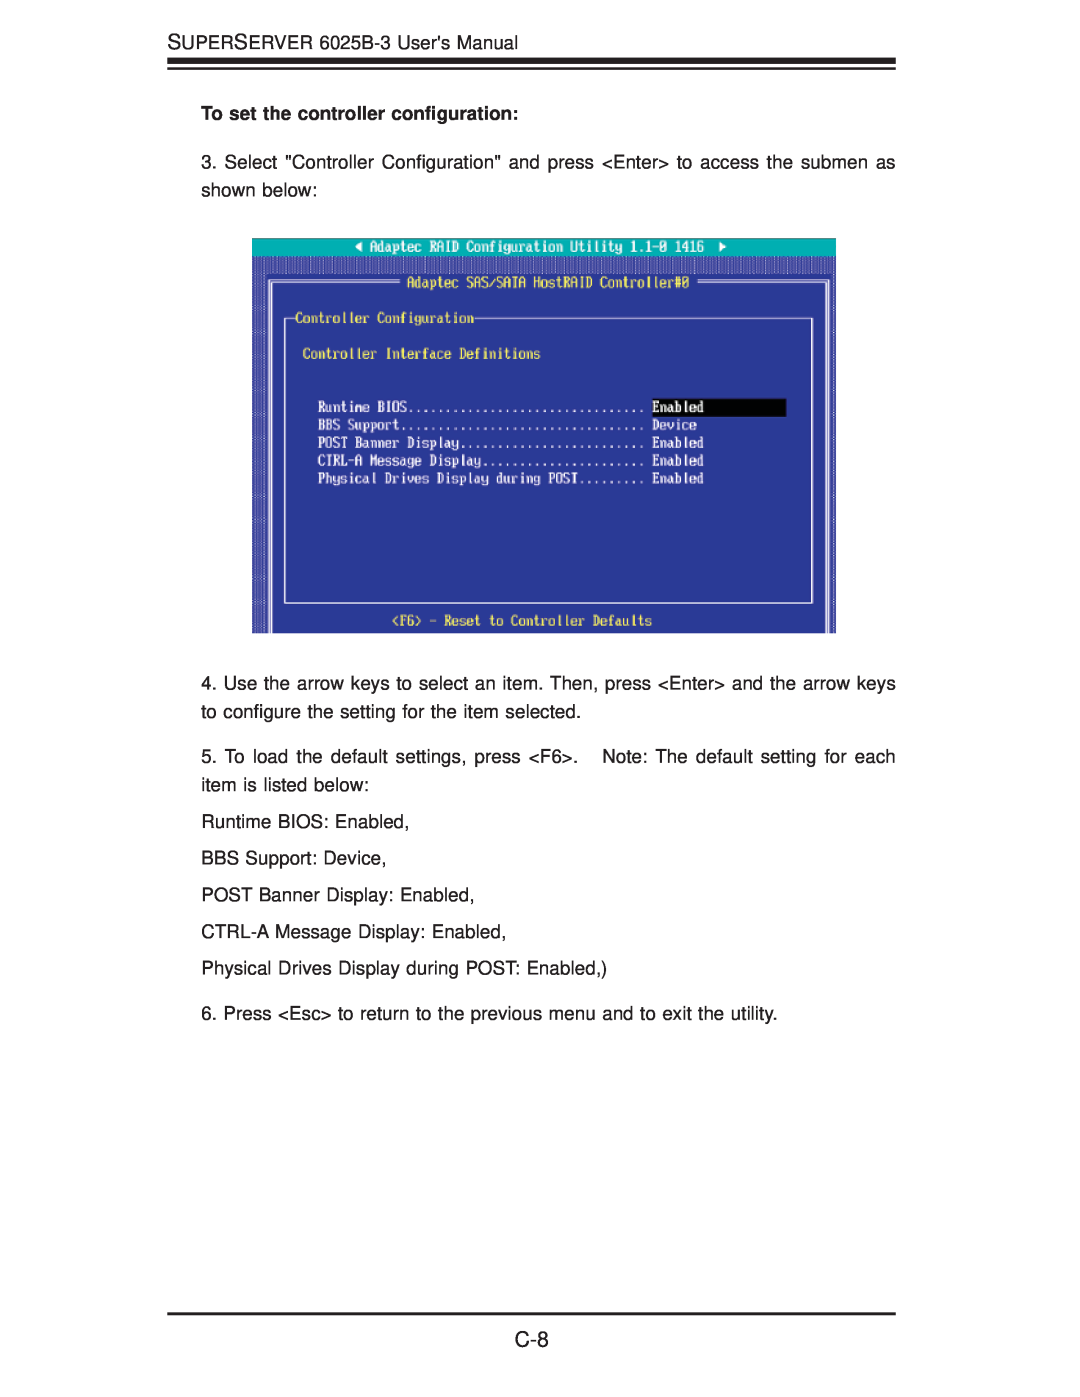 SUPER MICRO Computer 6025B-3R user manual To set the controller conﬁguration 